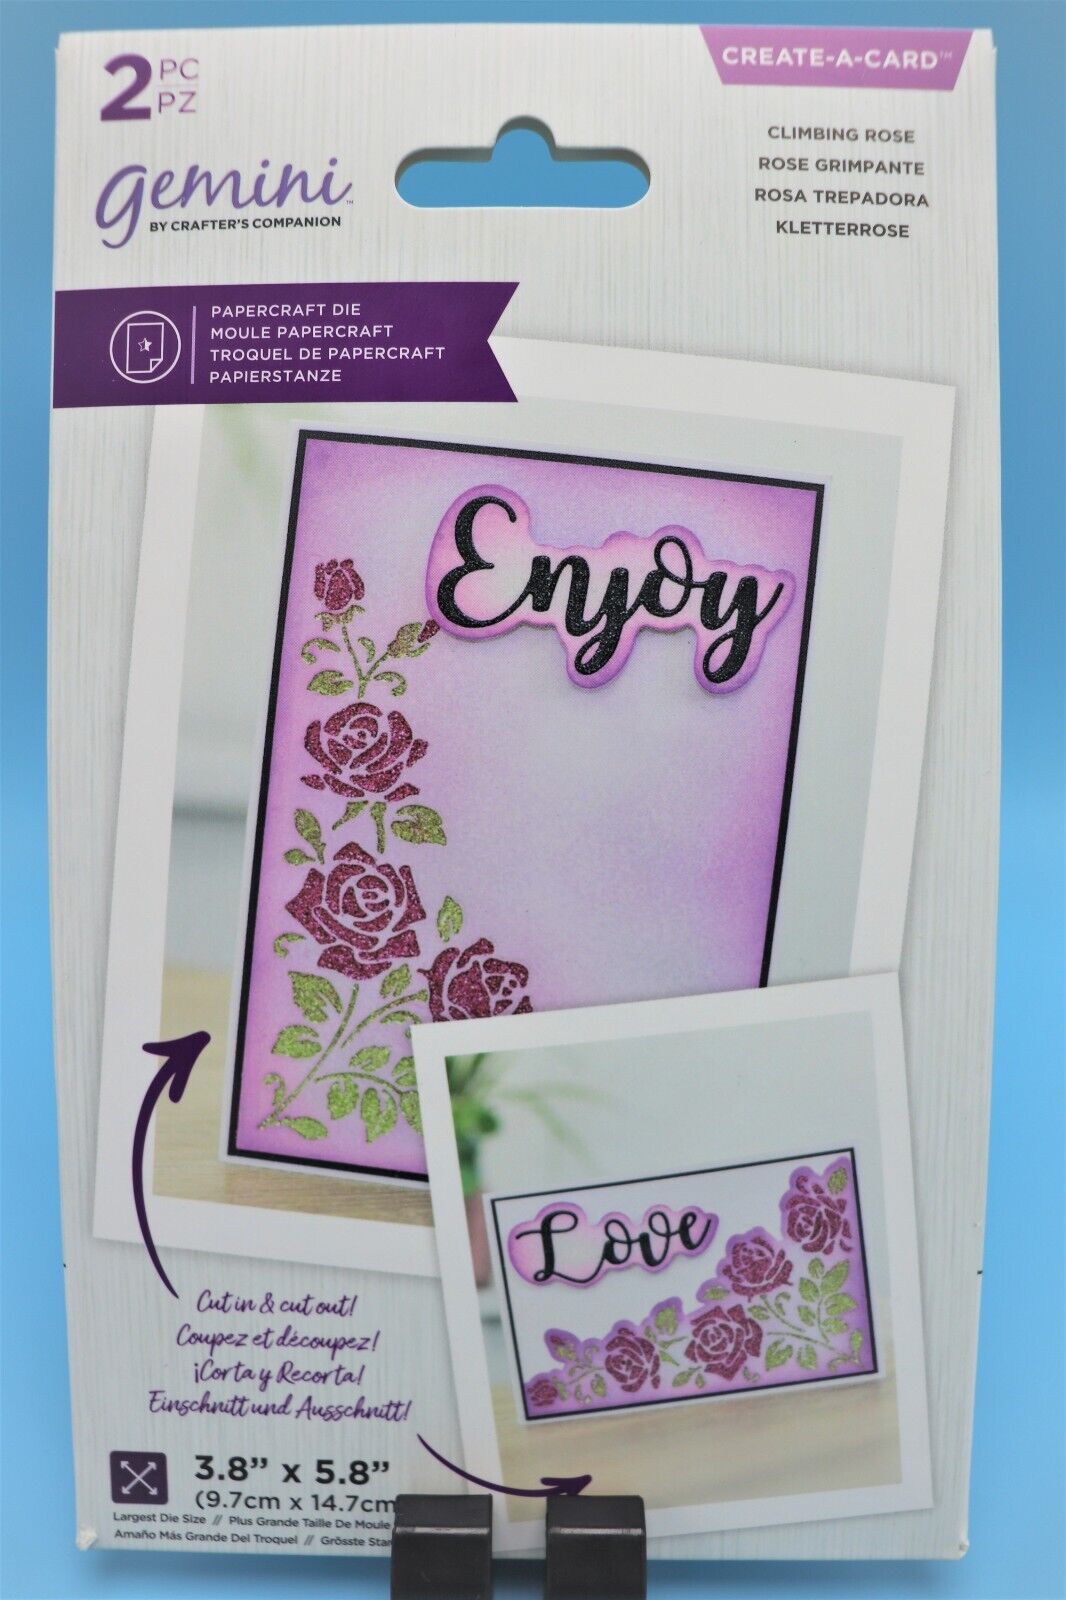 NEW gemini Create a Card Textured Corner Dies by Crafters Companion Gemini Does Not Apply - фотография #7